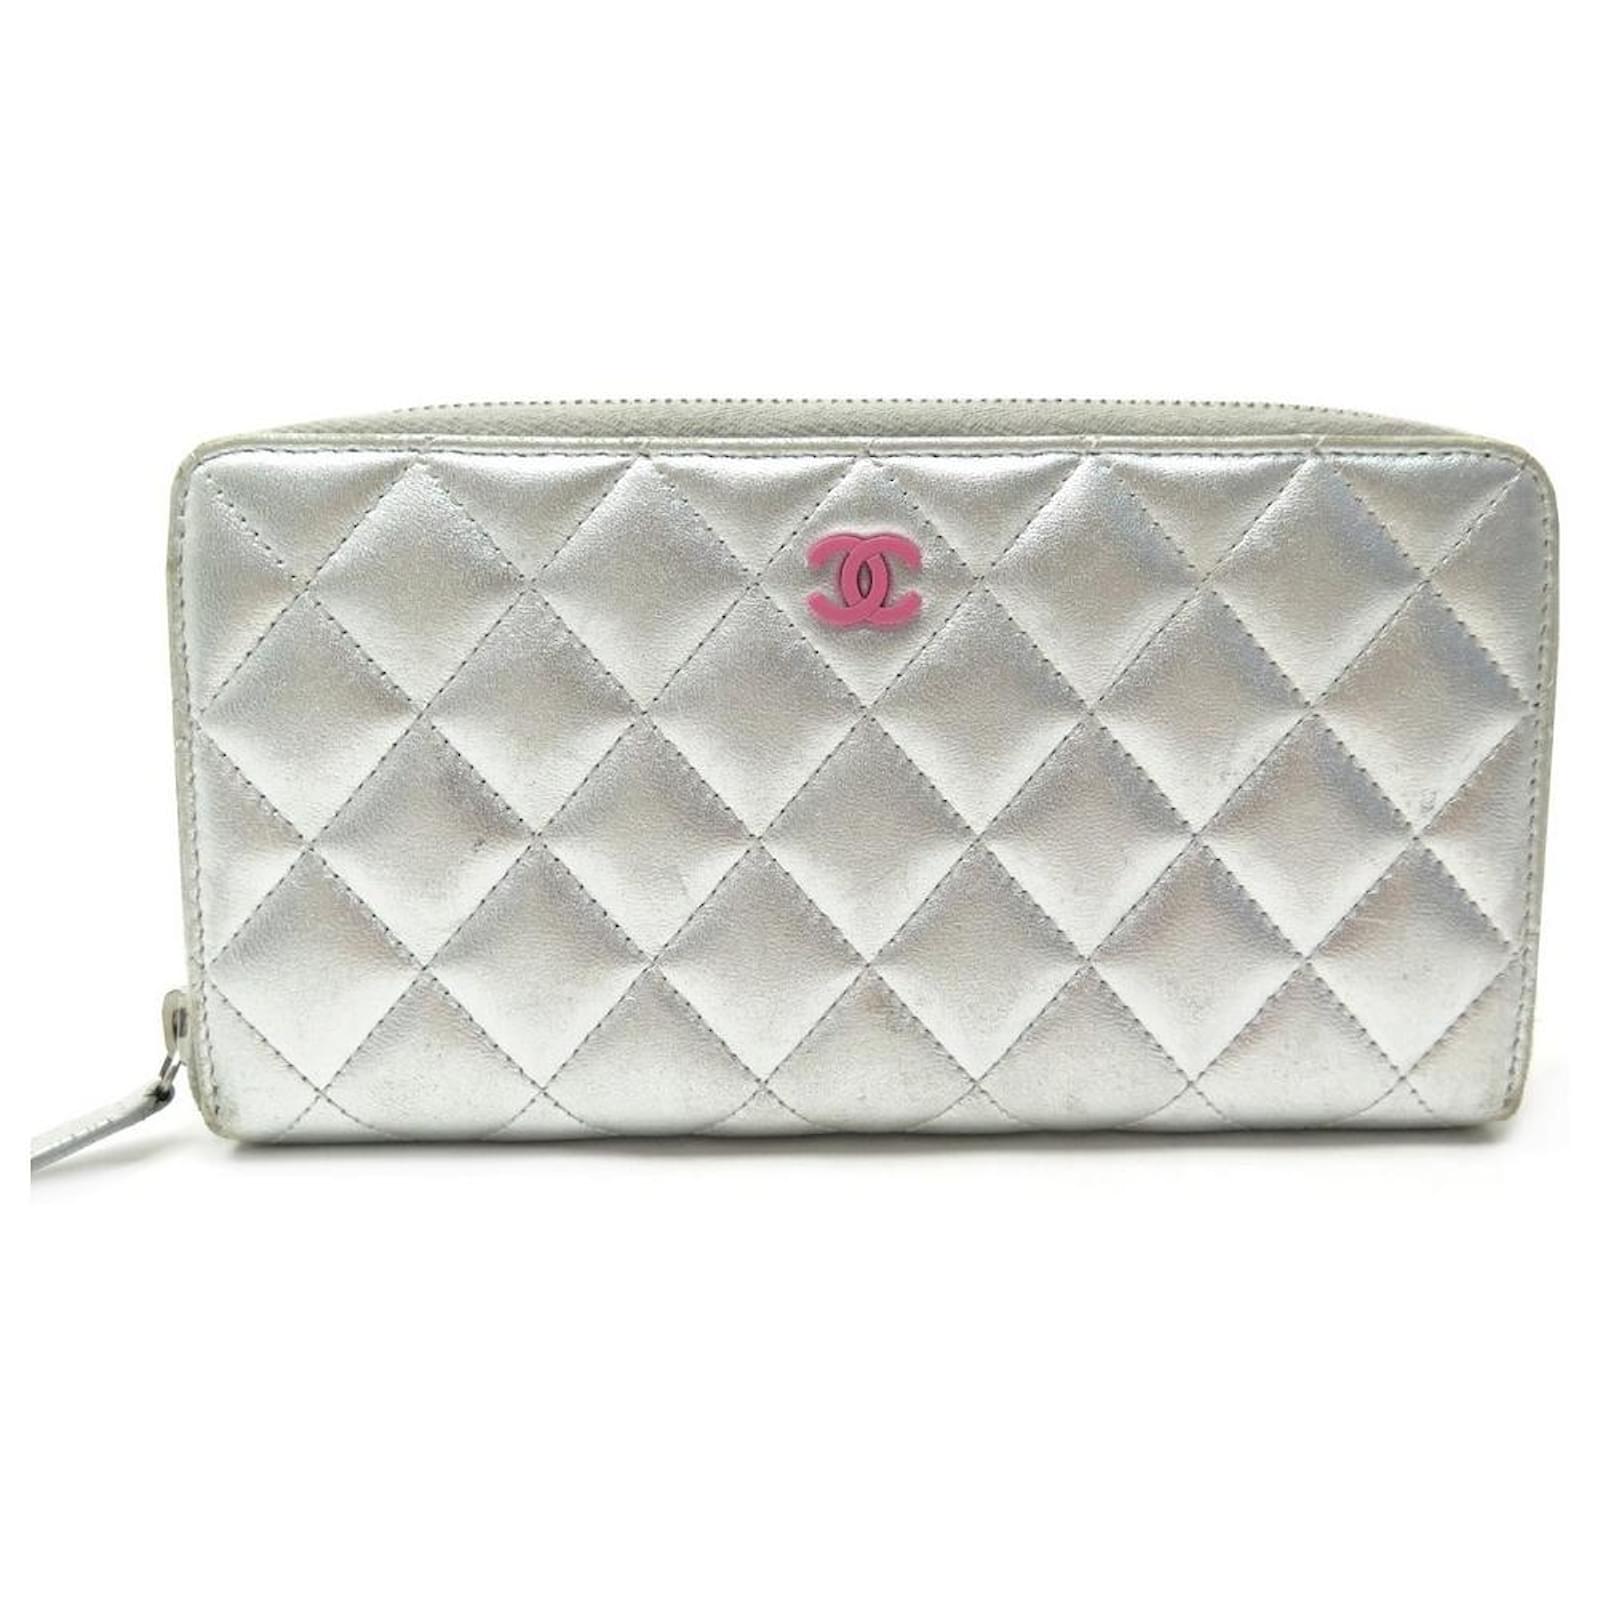 CHANEL, Accessories, Brand New Chanel Zipped Coin Purse